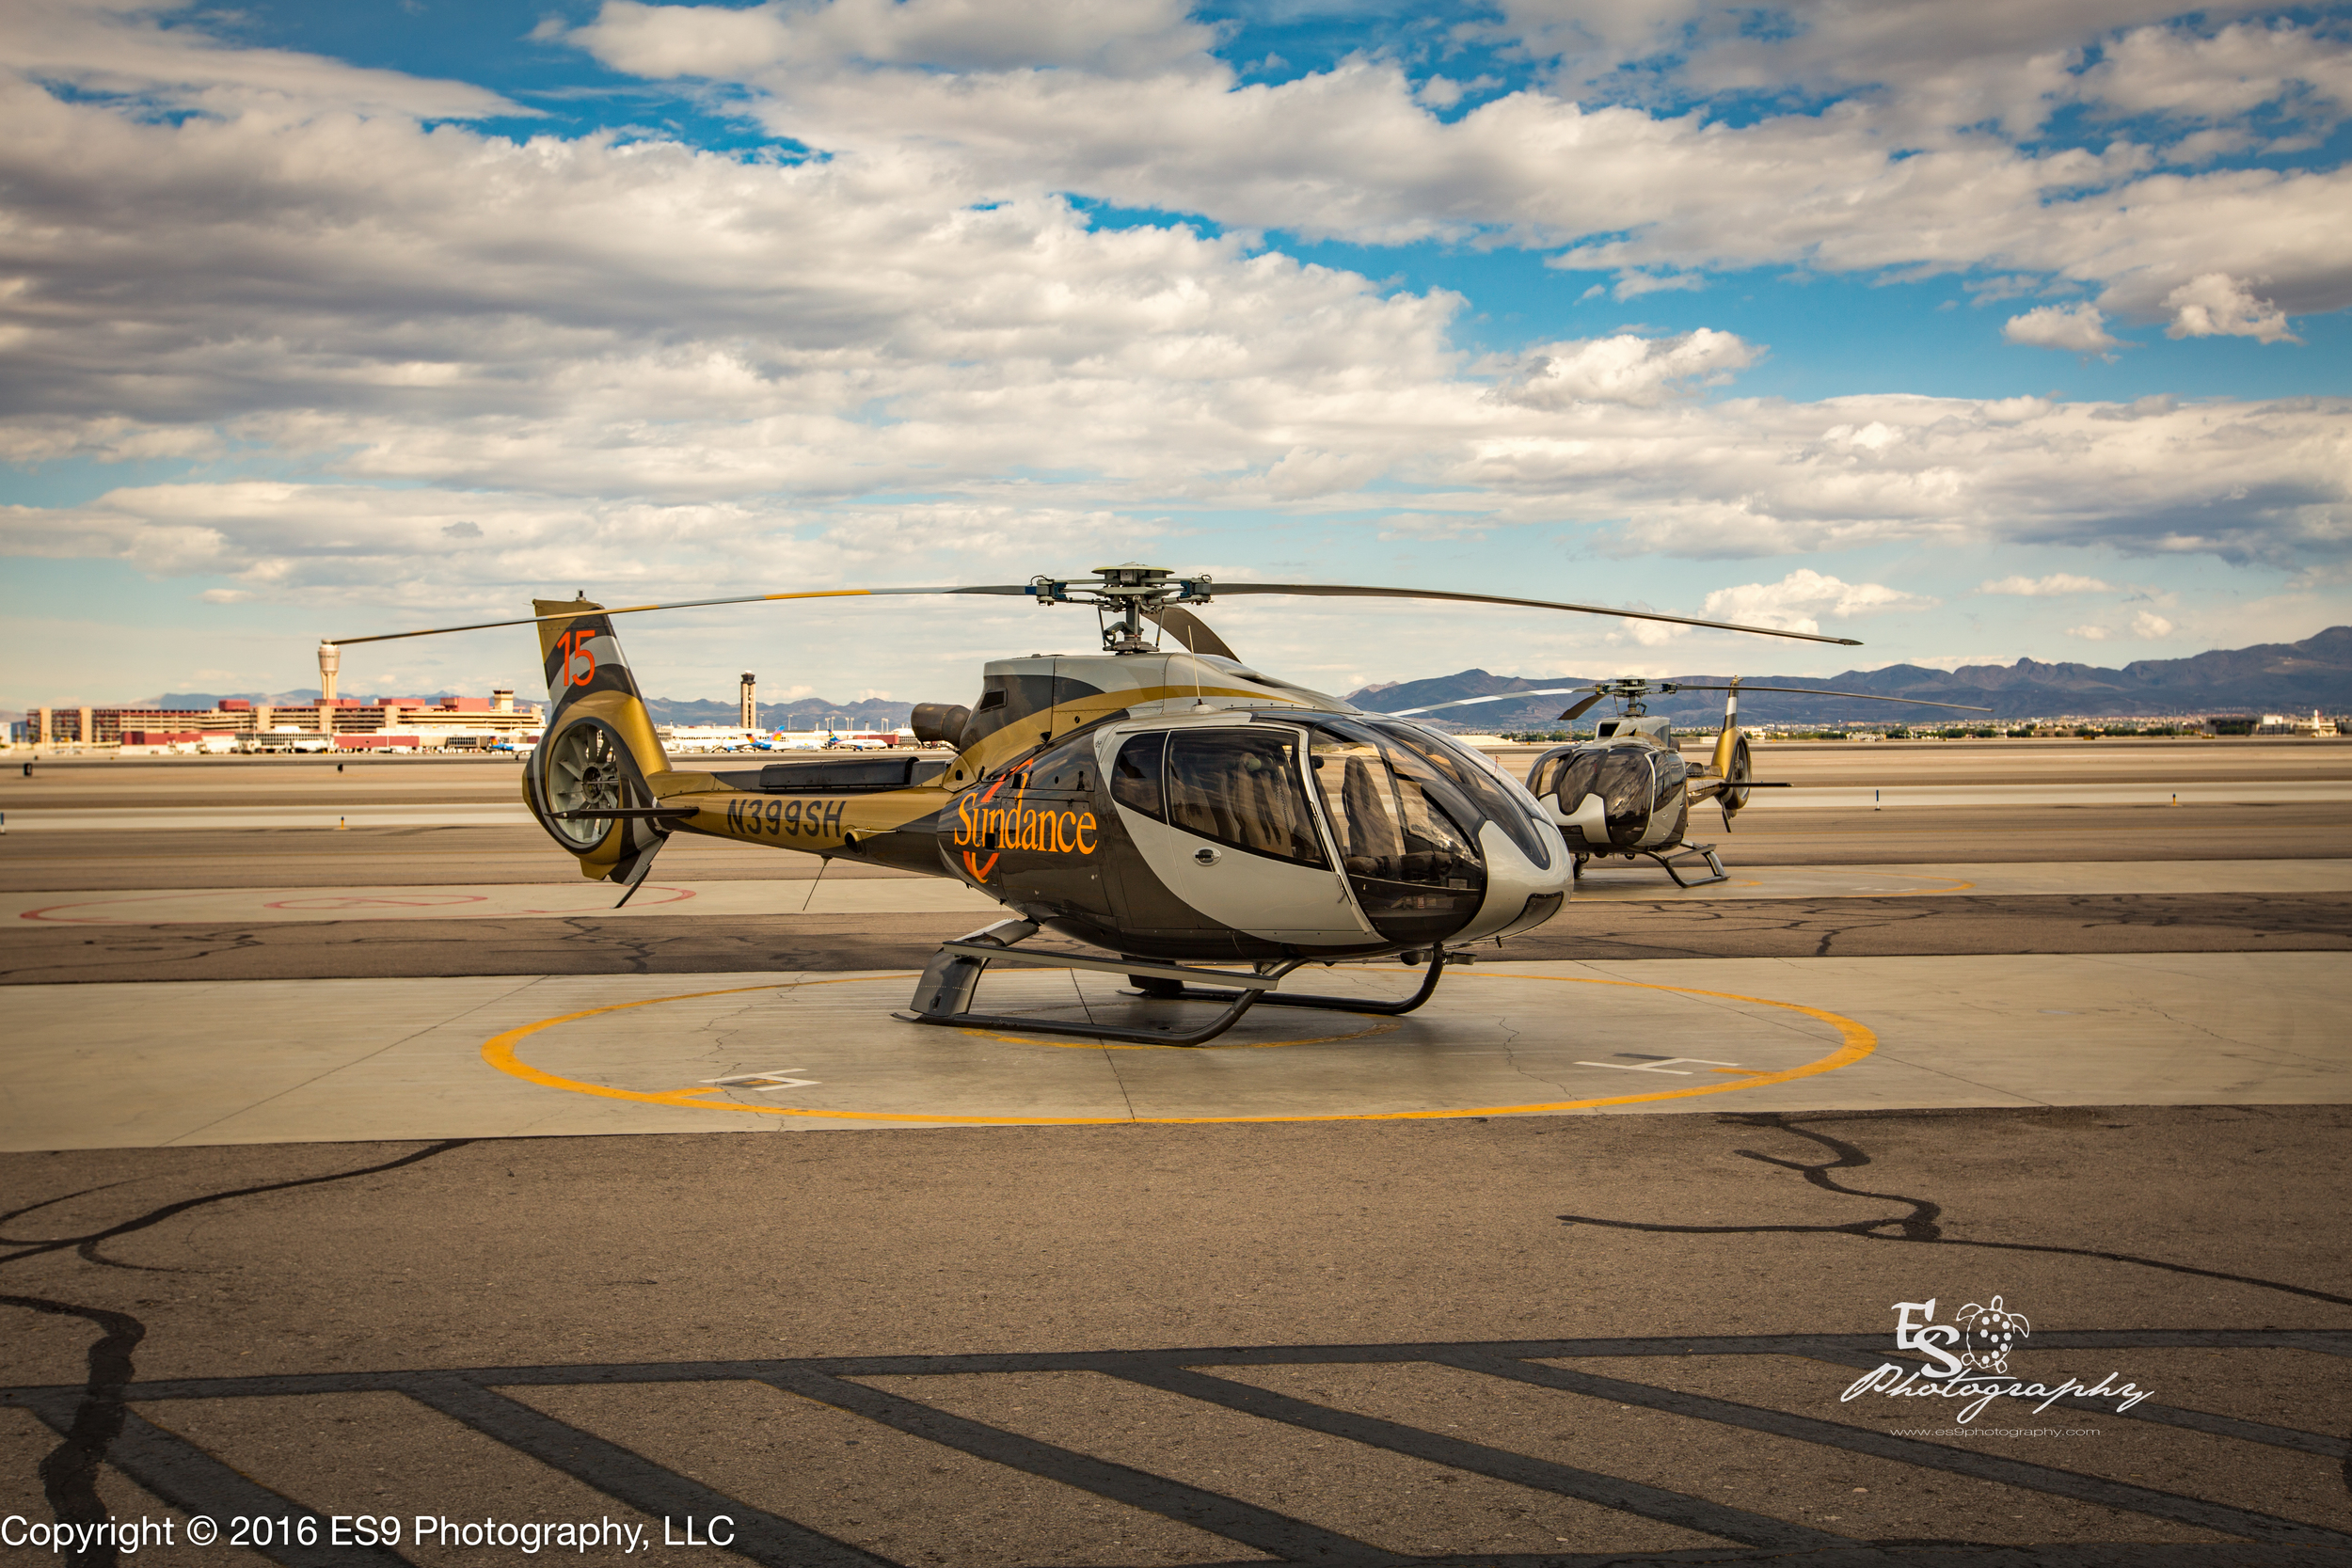 Our Helicopter the AIRBUS EC-130 Sundance Helicopter Tour Grand Canyon West @ ES9 Photography 2016.jpg